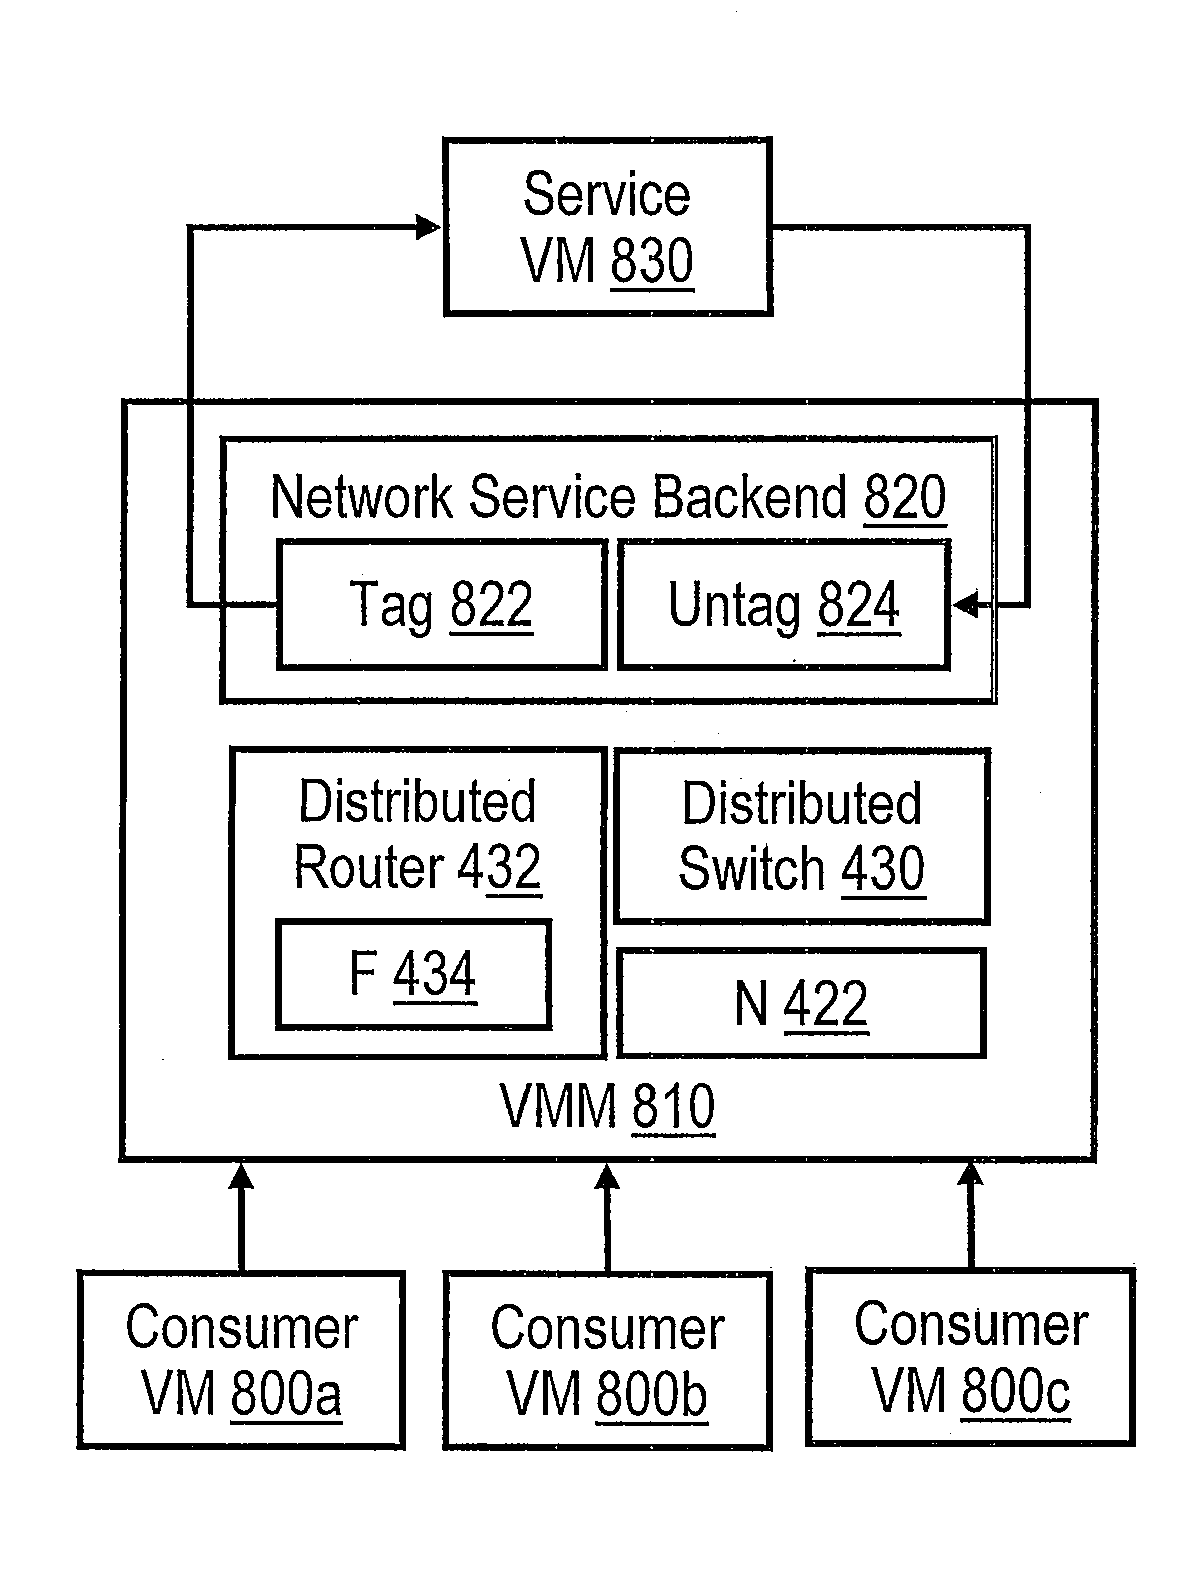 Hypervisor routing between networks in a virtual networking environment